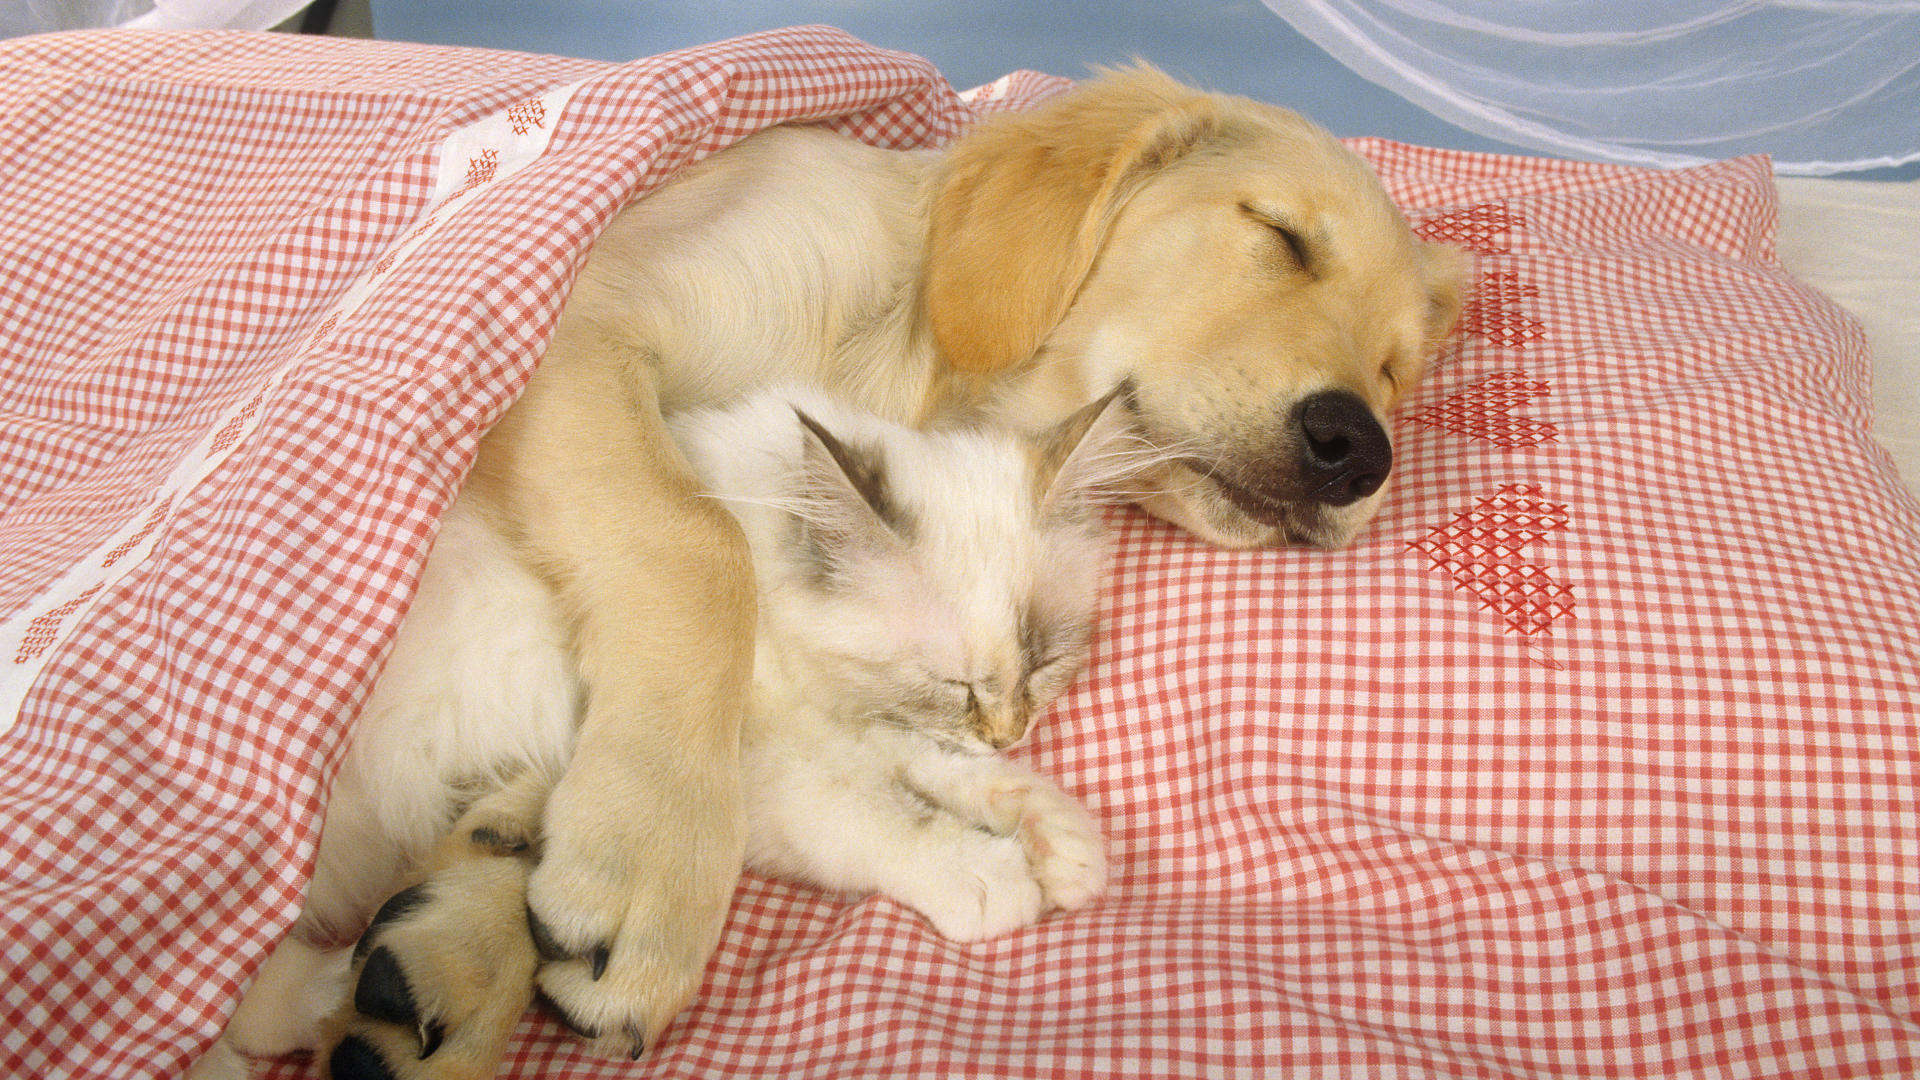 Cats And Dogs Wallpaper 140 HD Wallpapers | Glefia.com